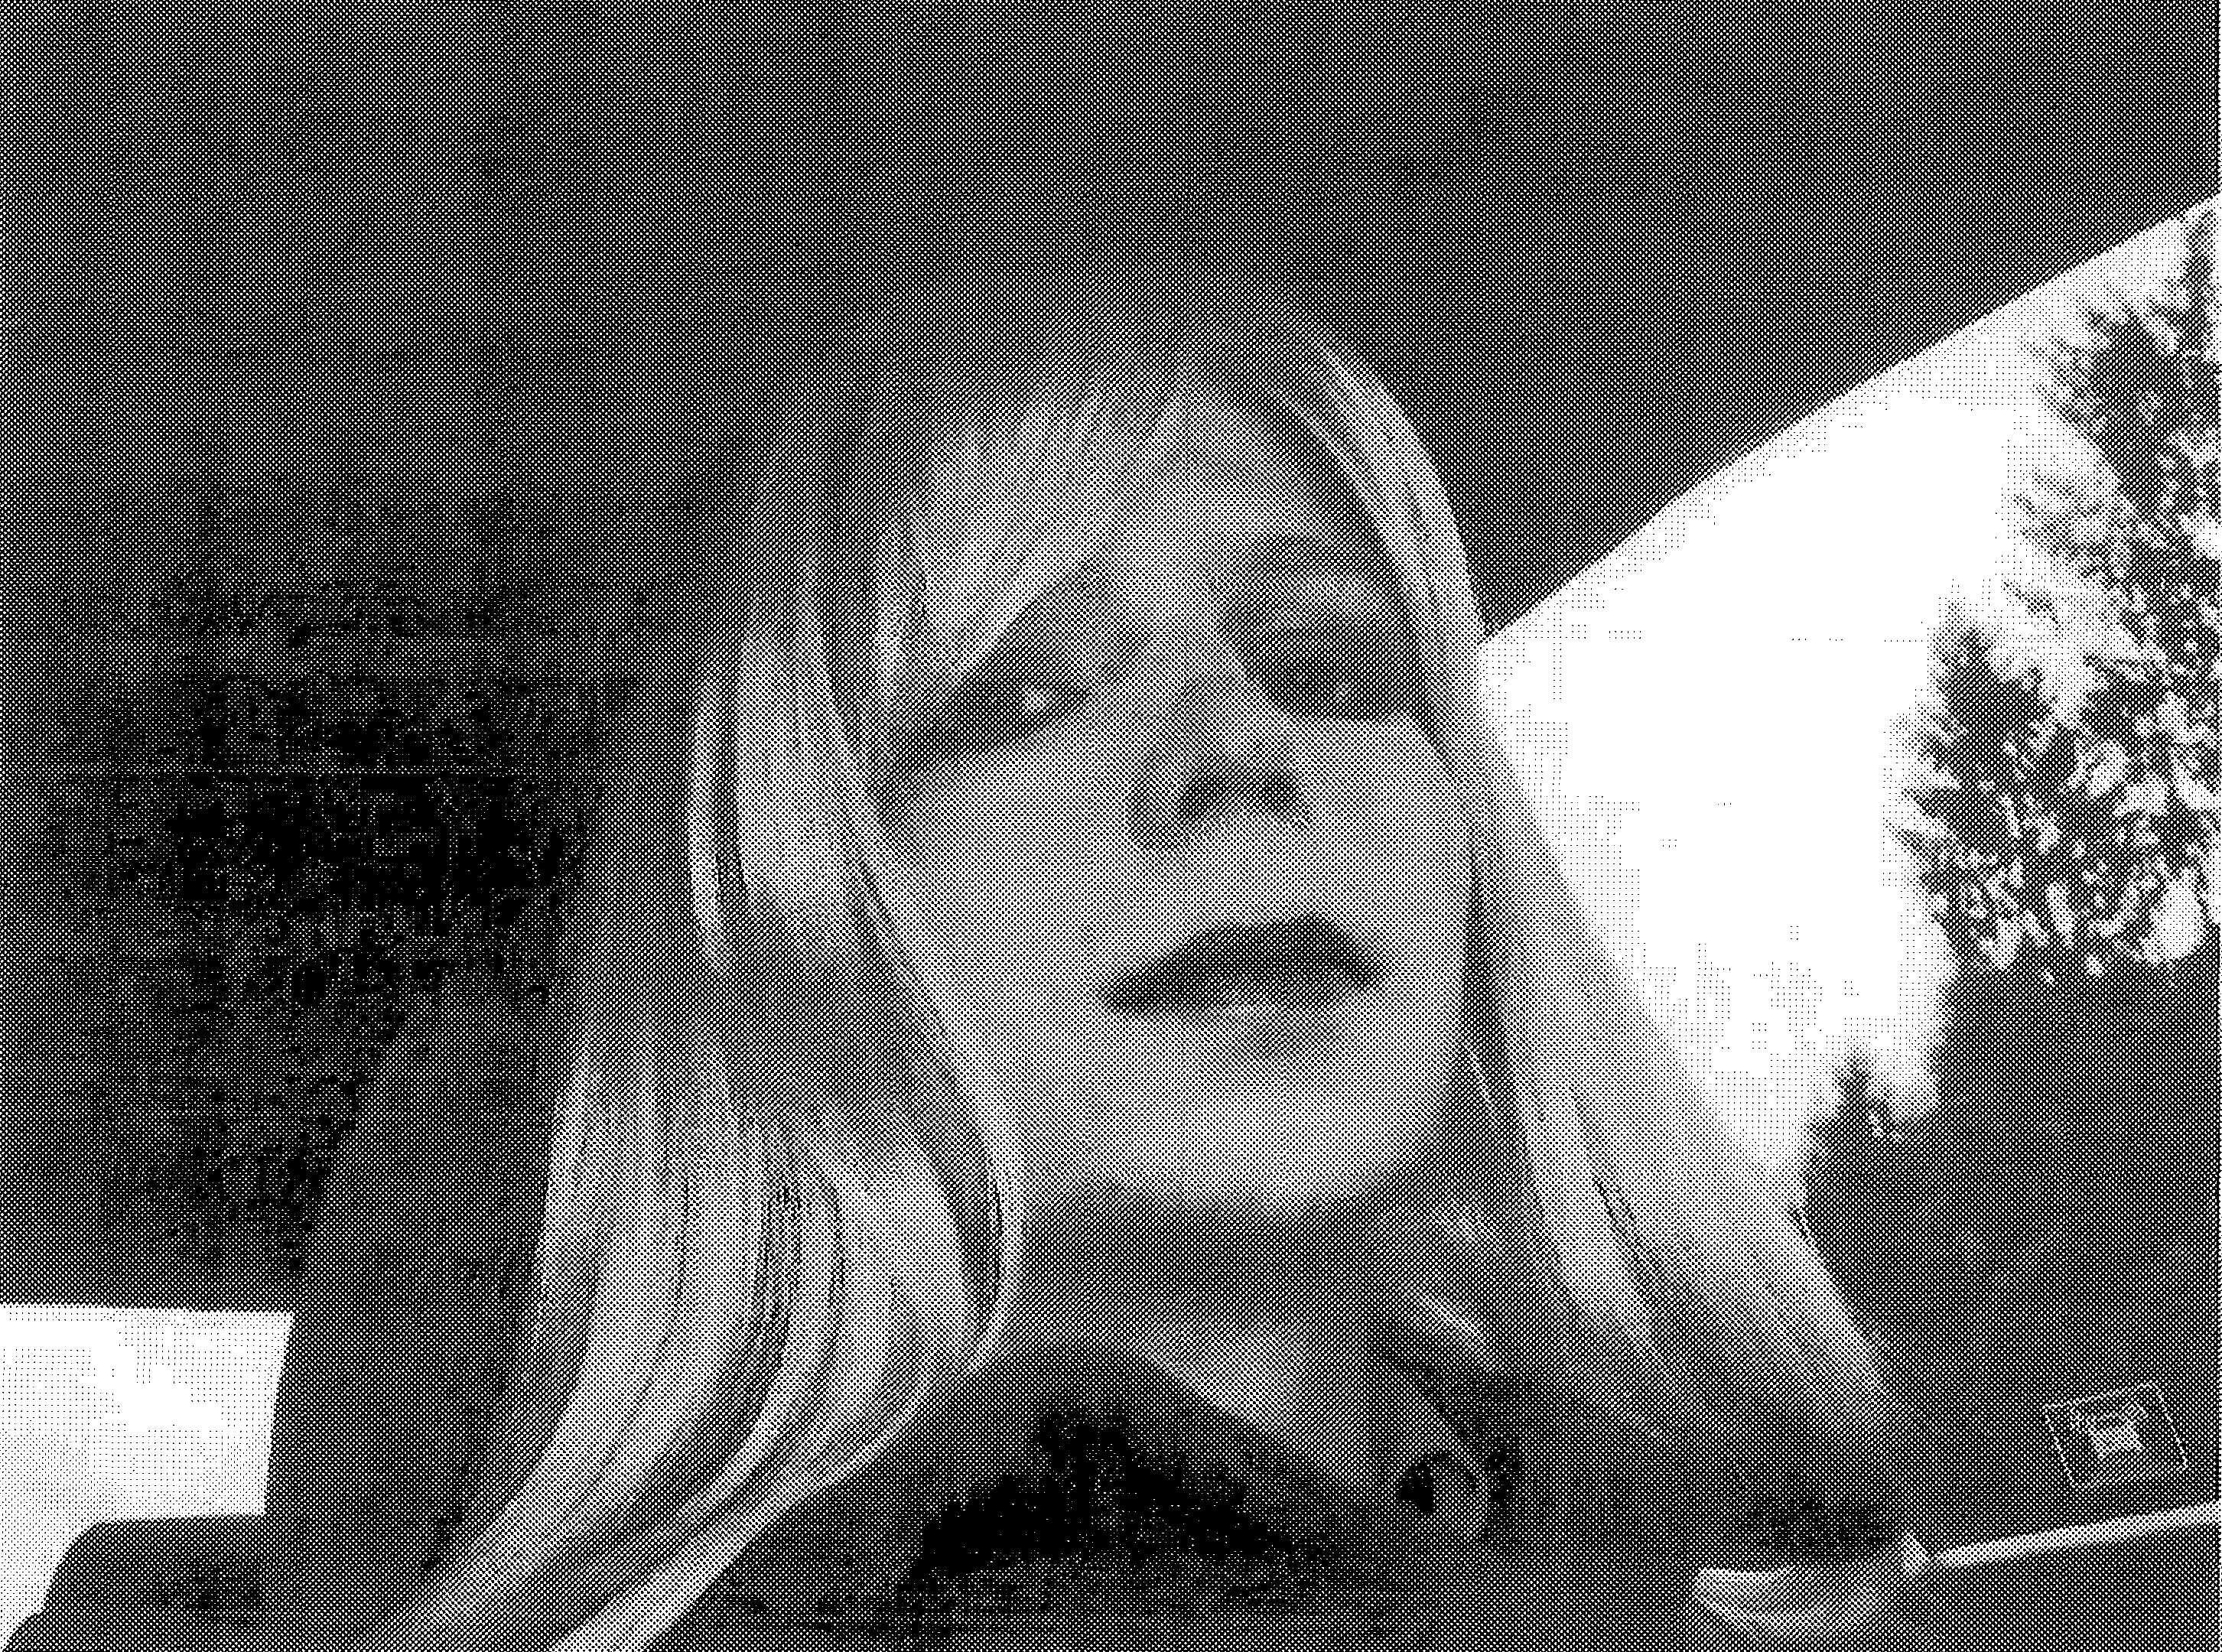 Chelsea Manning is pictured dressed as a woman in this 2010 photograph obtained on August 14, 2013